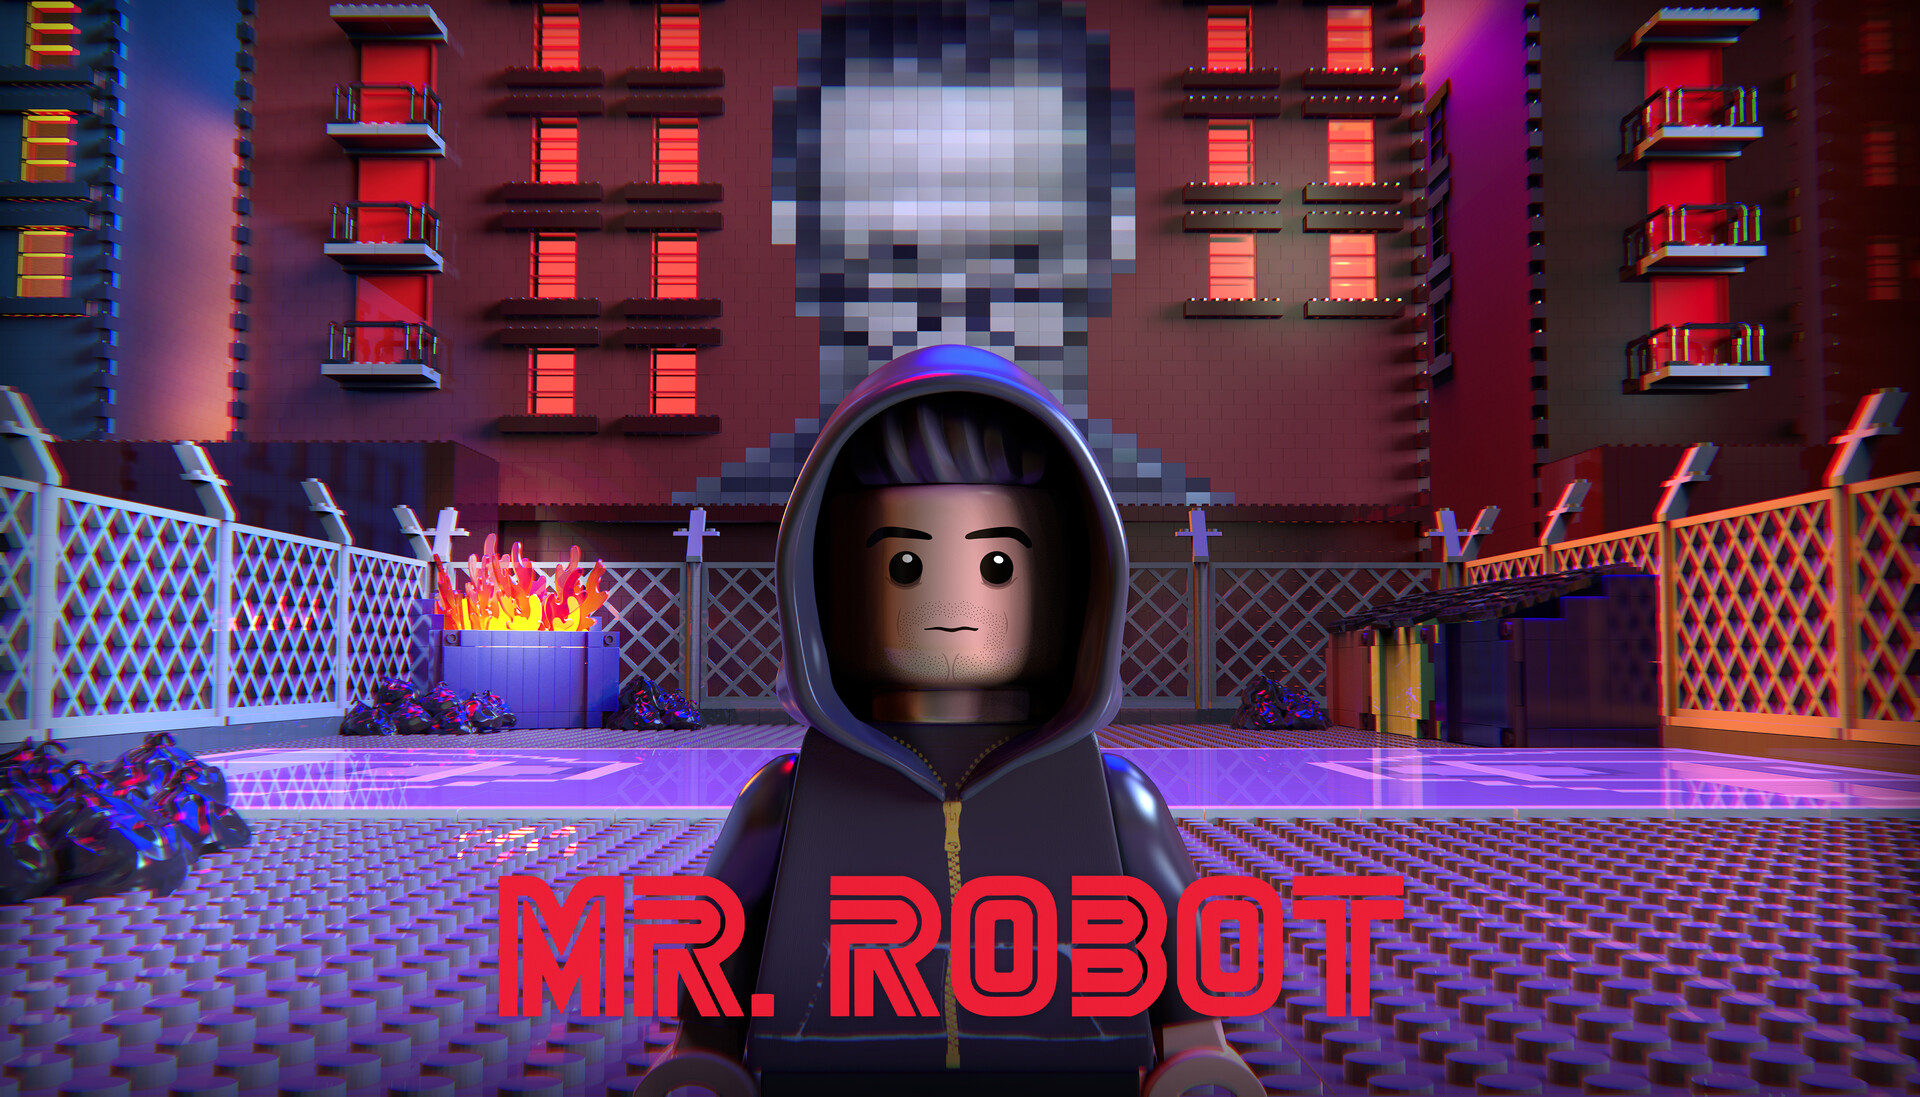 Here's my Mr. Robot wallpaper from the latest episode : r/MrRobot